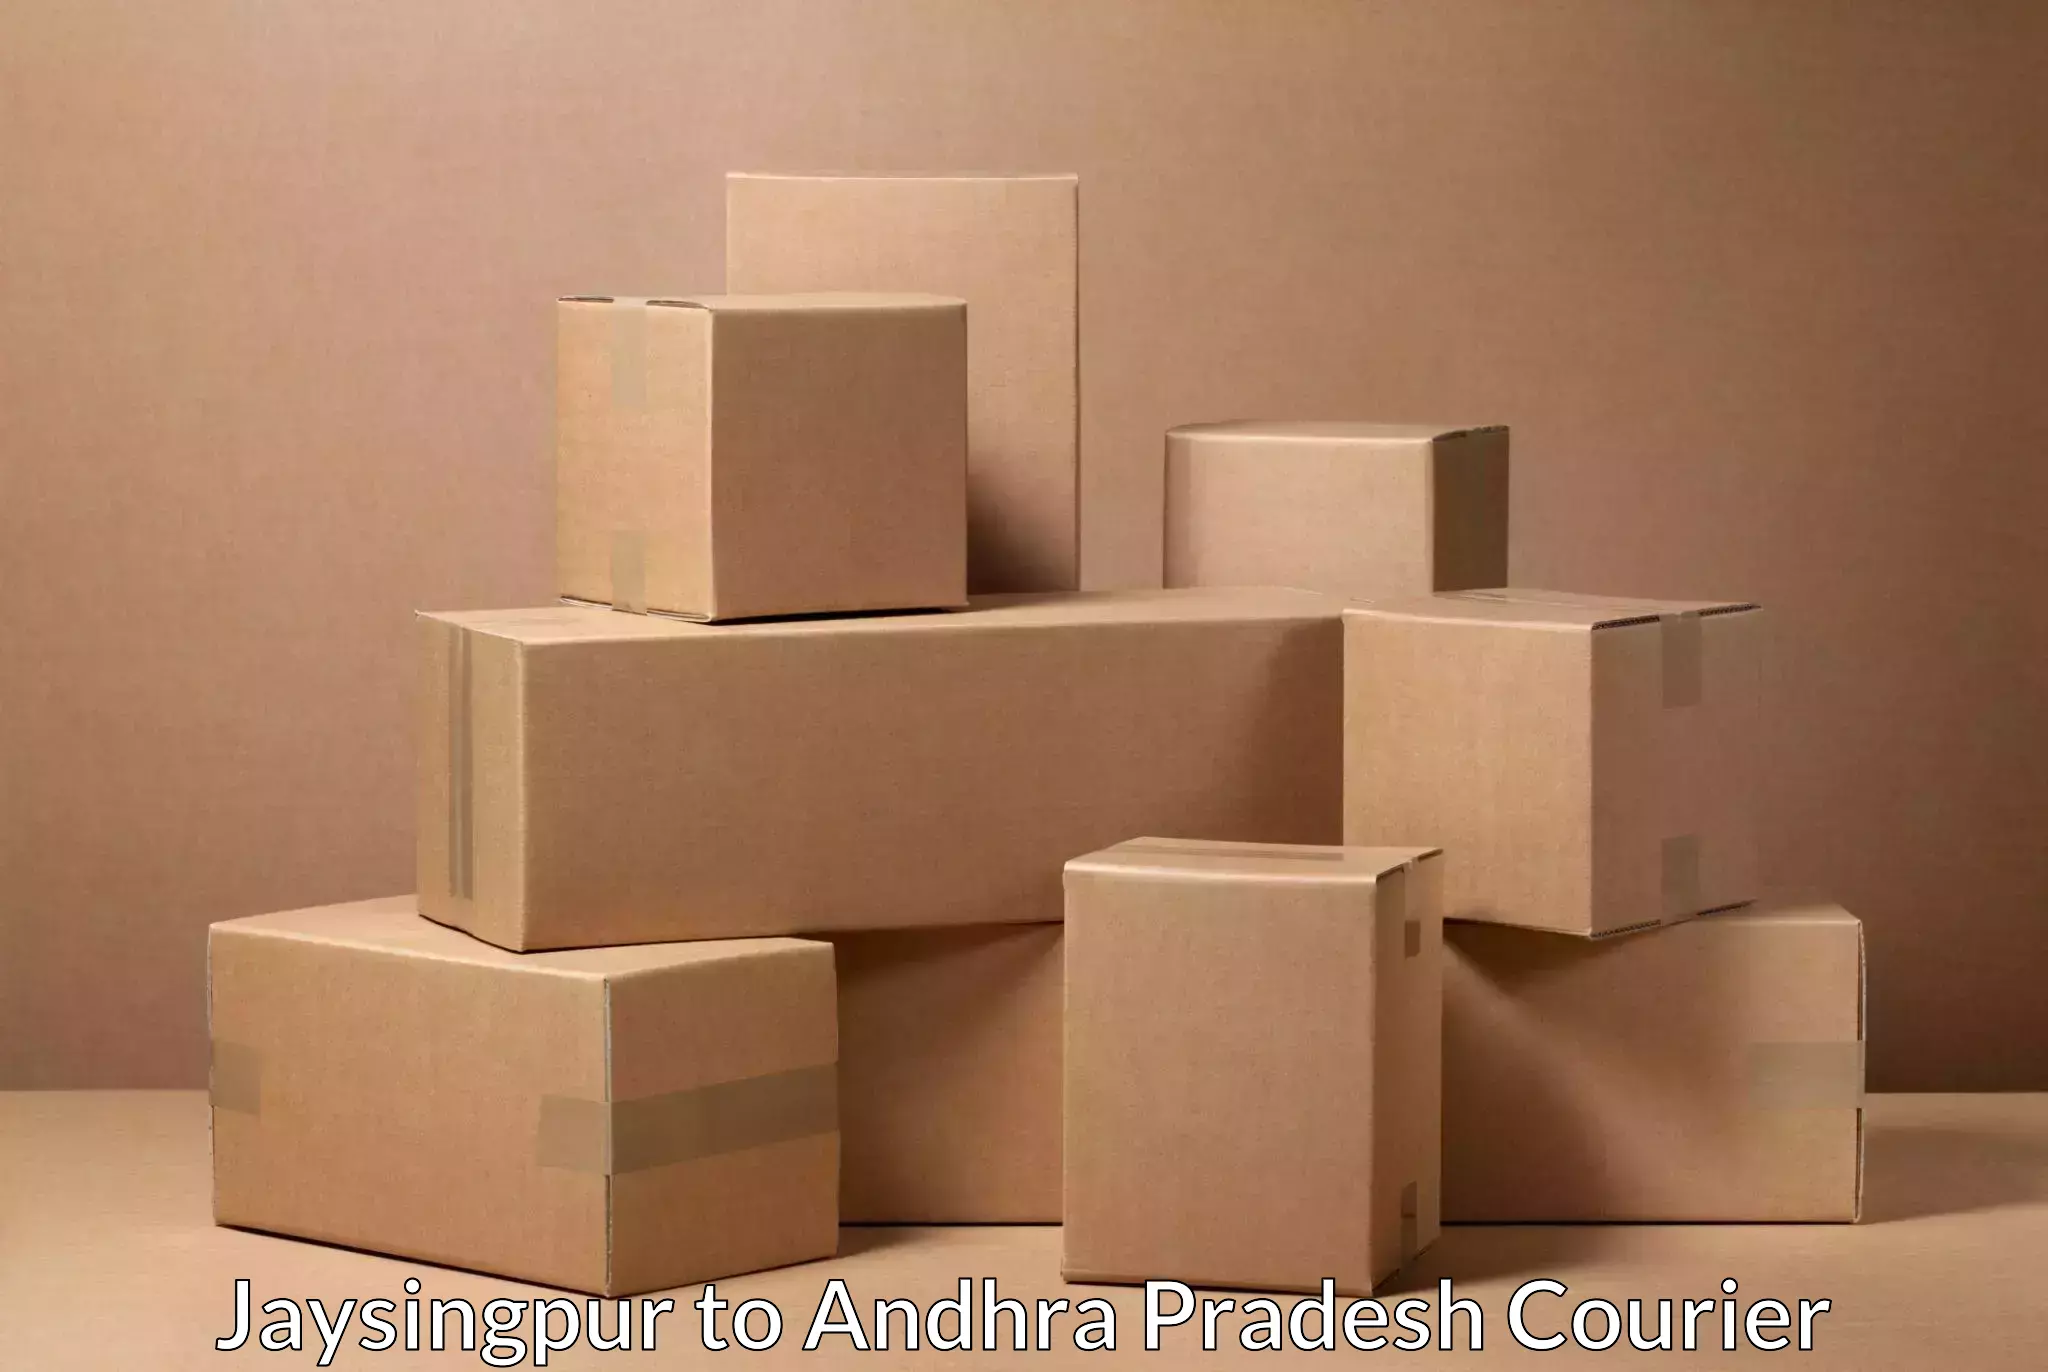 Quality courier services in Jaysingpur to Changaroth